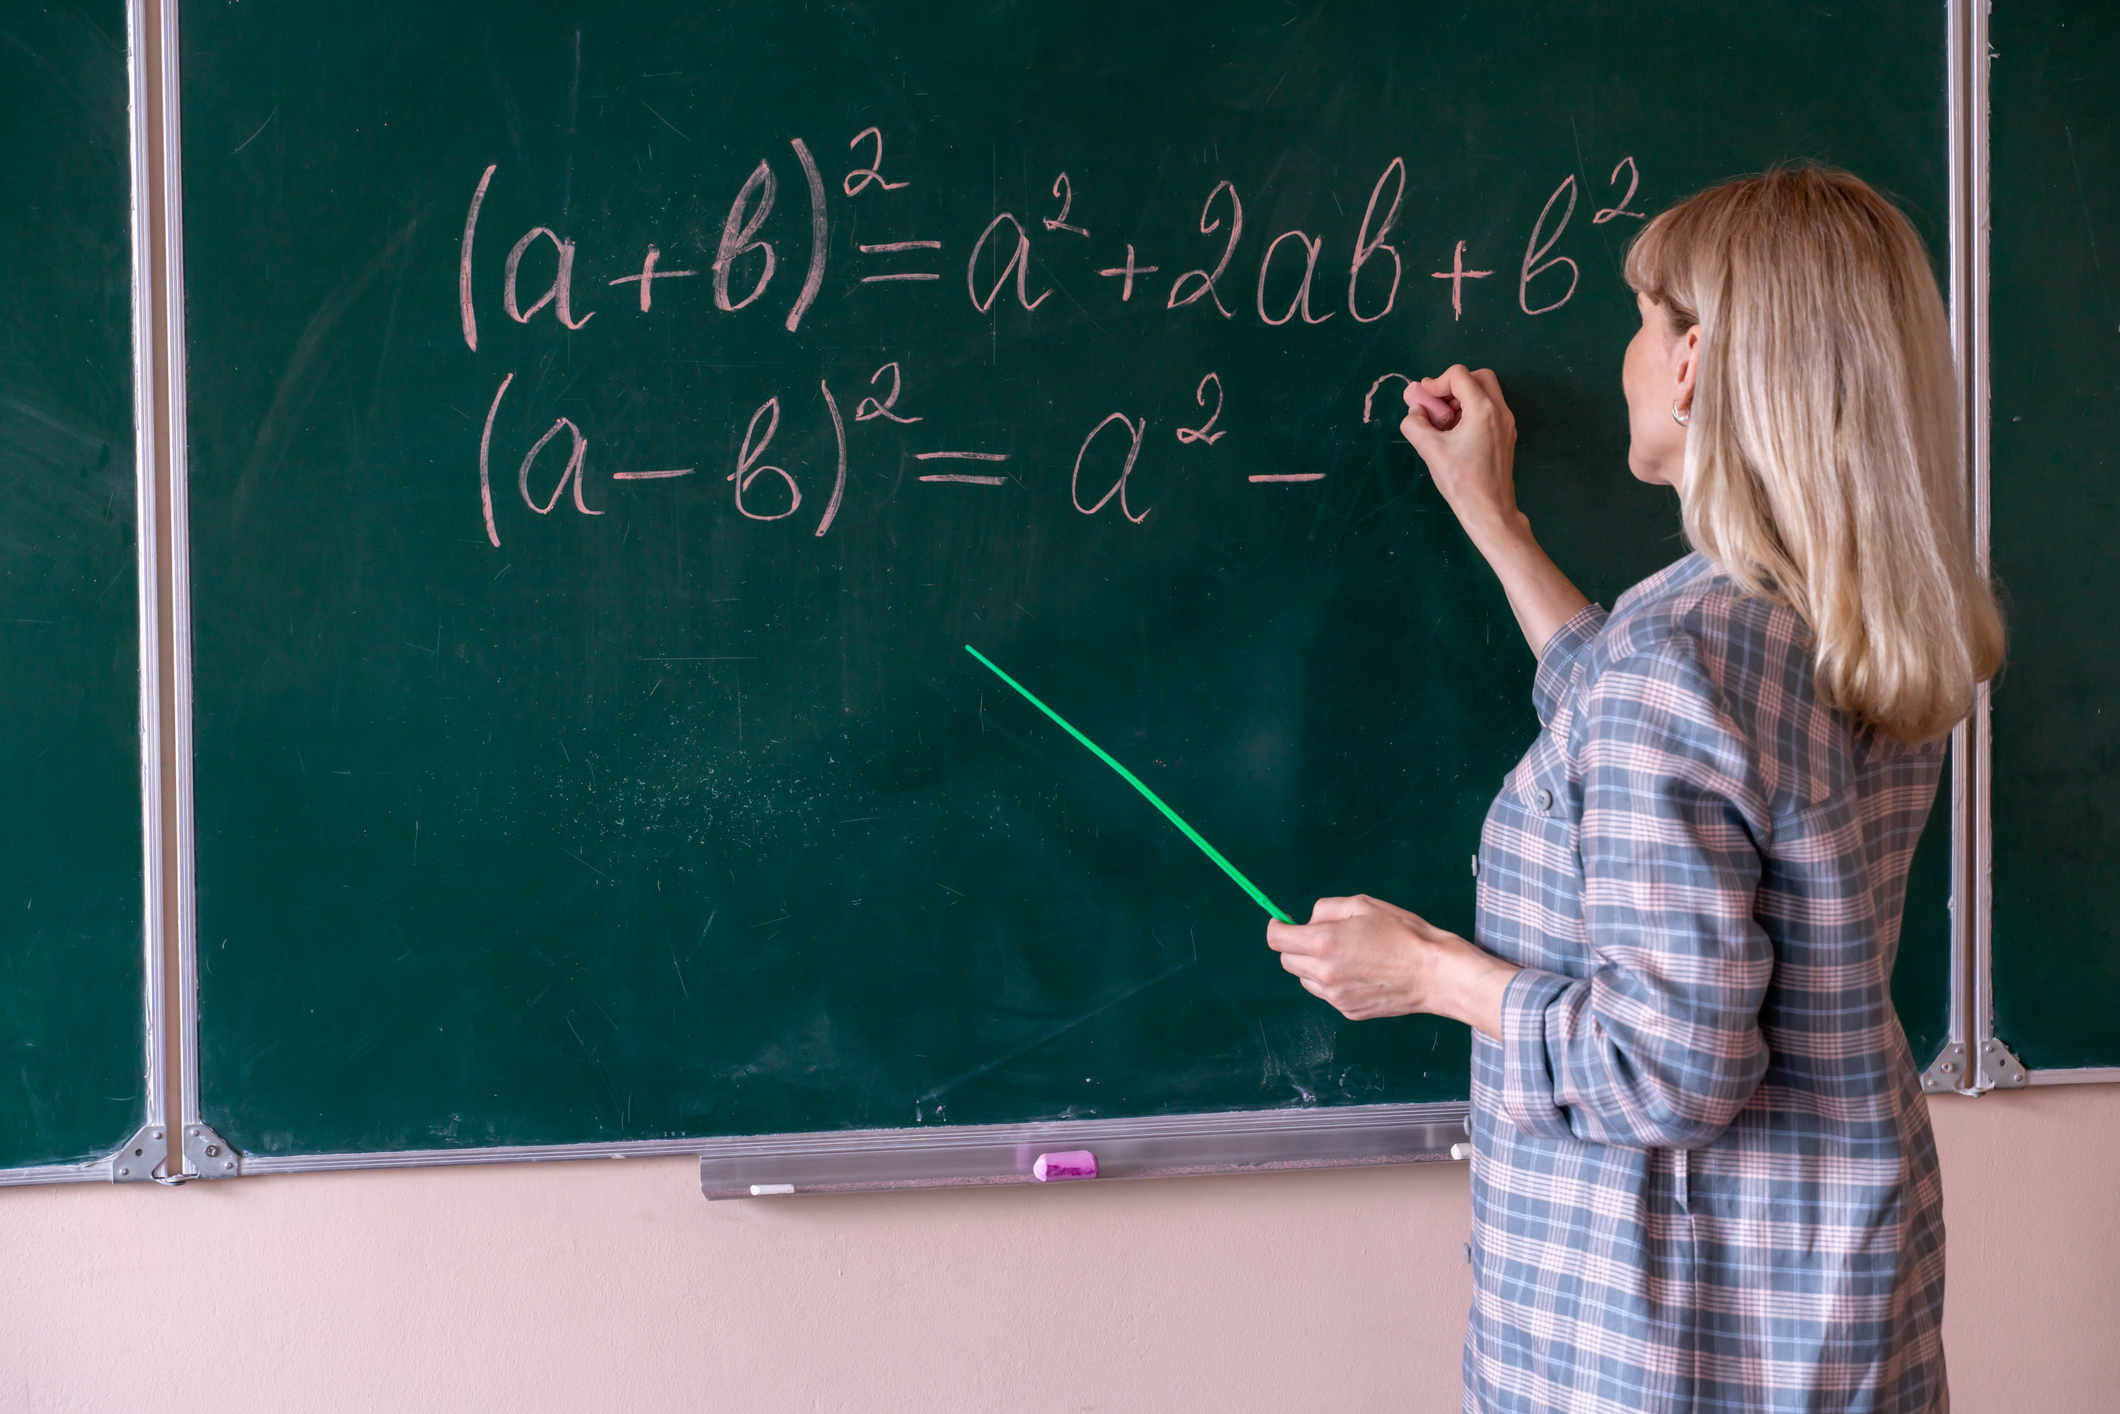 Woman teaching algebra on a chalkboard, pointing with a rod